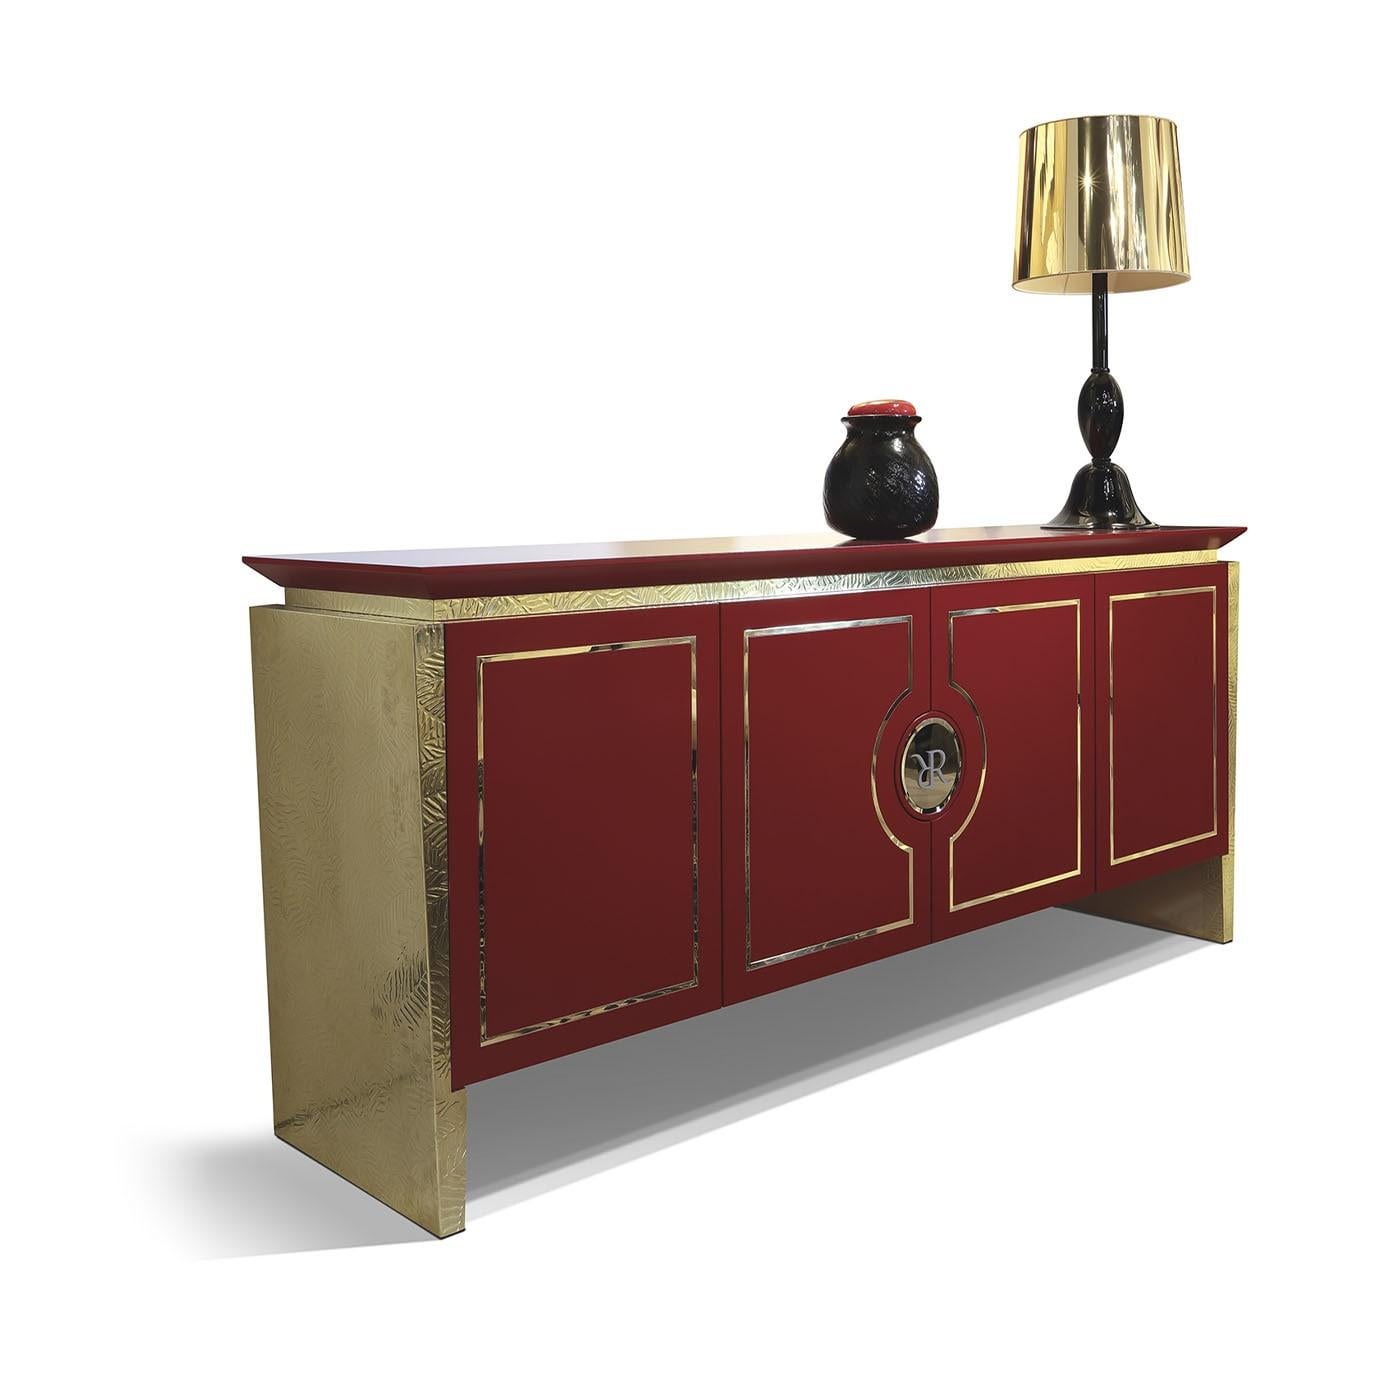 Daring in its color scheme as it is in its dynamic-cut lines, this sideboard is sure to be the focal point of exclusive modern decors. Chiseled by hand, the brass panels making up its frame sport a gleaming golden tone that illuminates the rest of